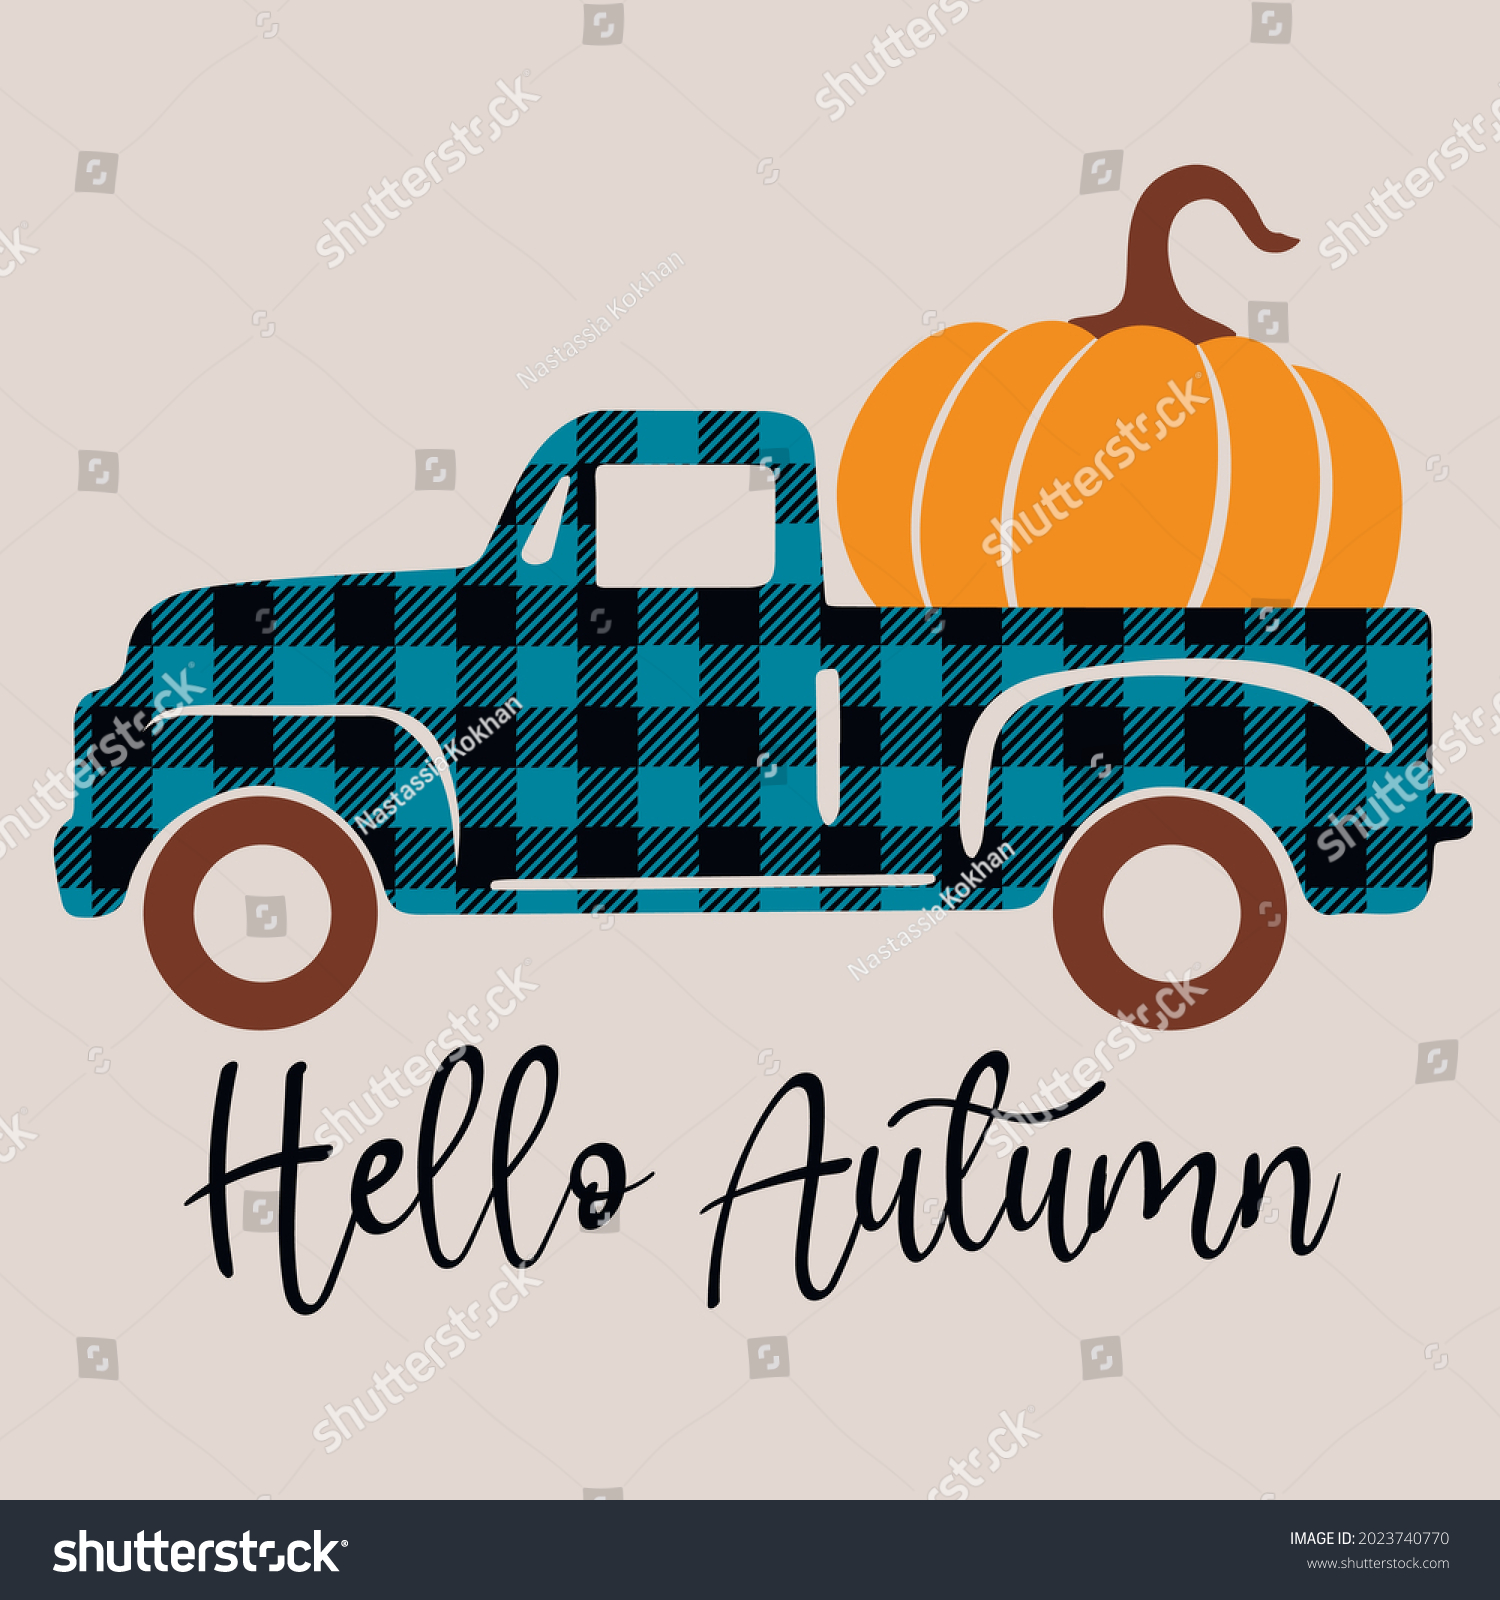 SVG of Fall truck with pumpkin svg vector Illustration isolated on white background.Happy fall truck shirt design. Pumpkin truck for autumn shirt design. Fall sublimation. Hello autumn truck with pumpkin svg svg